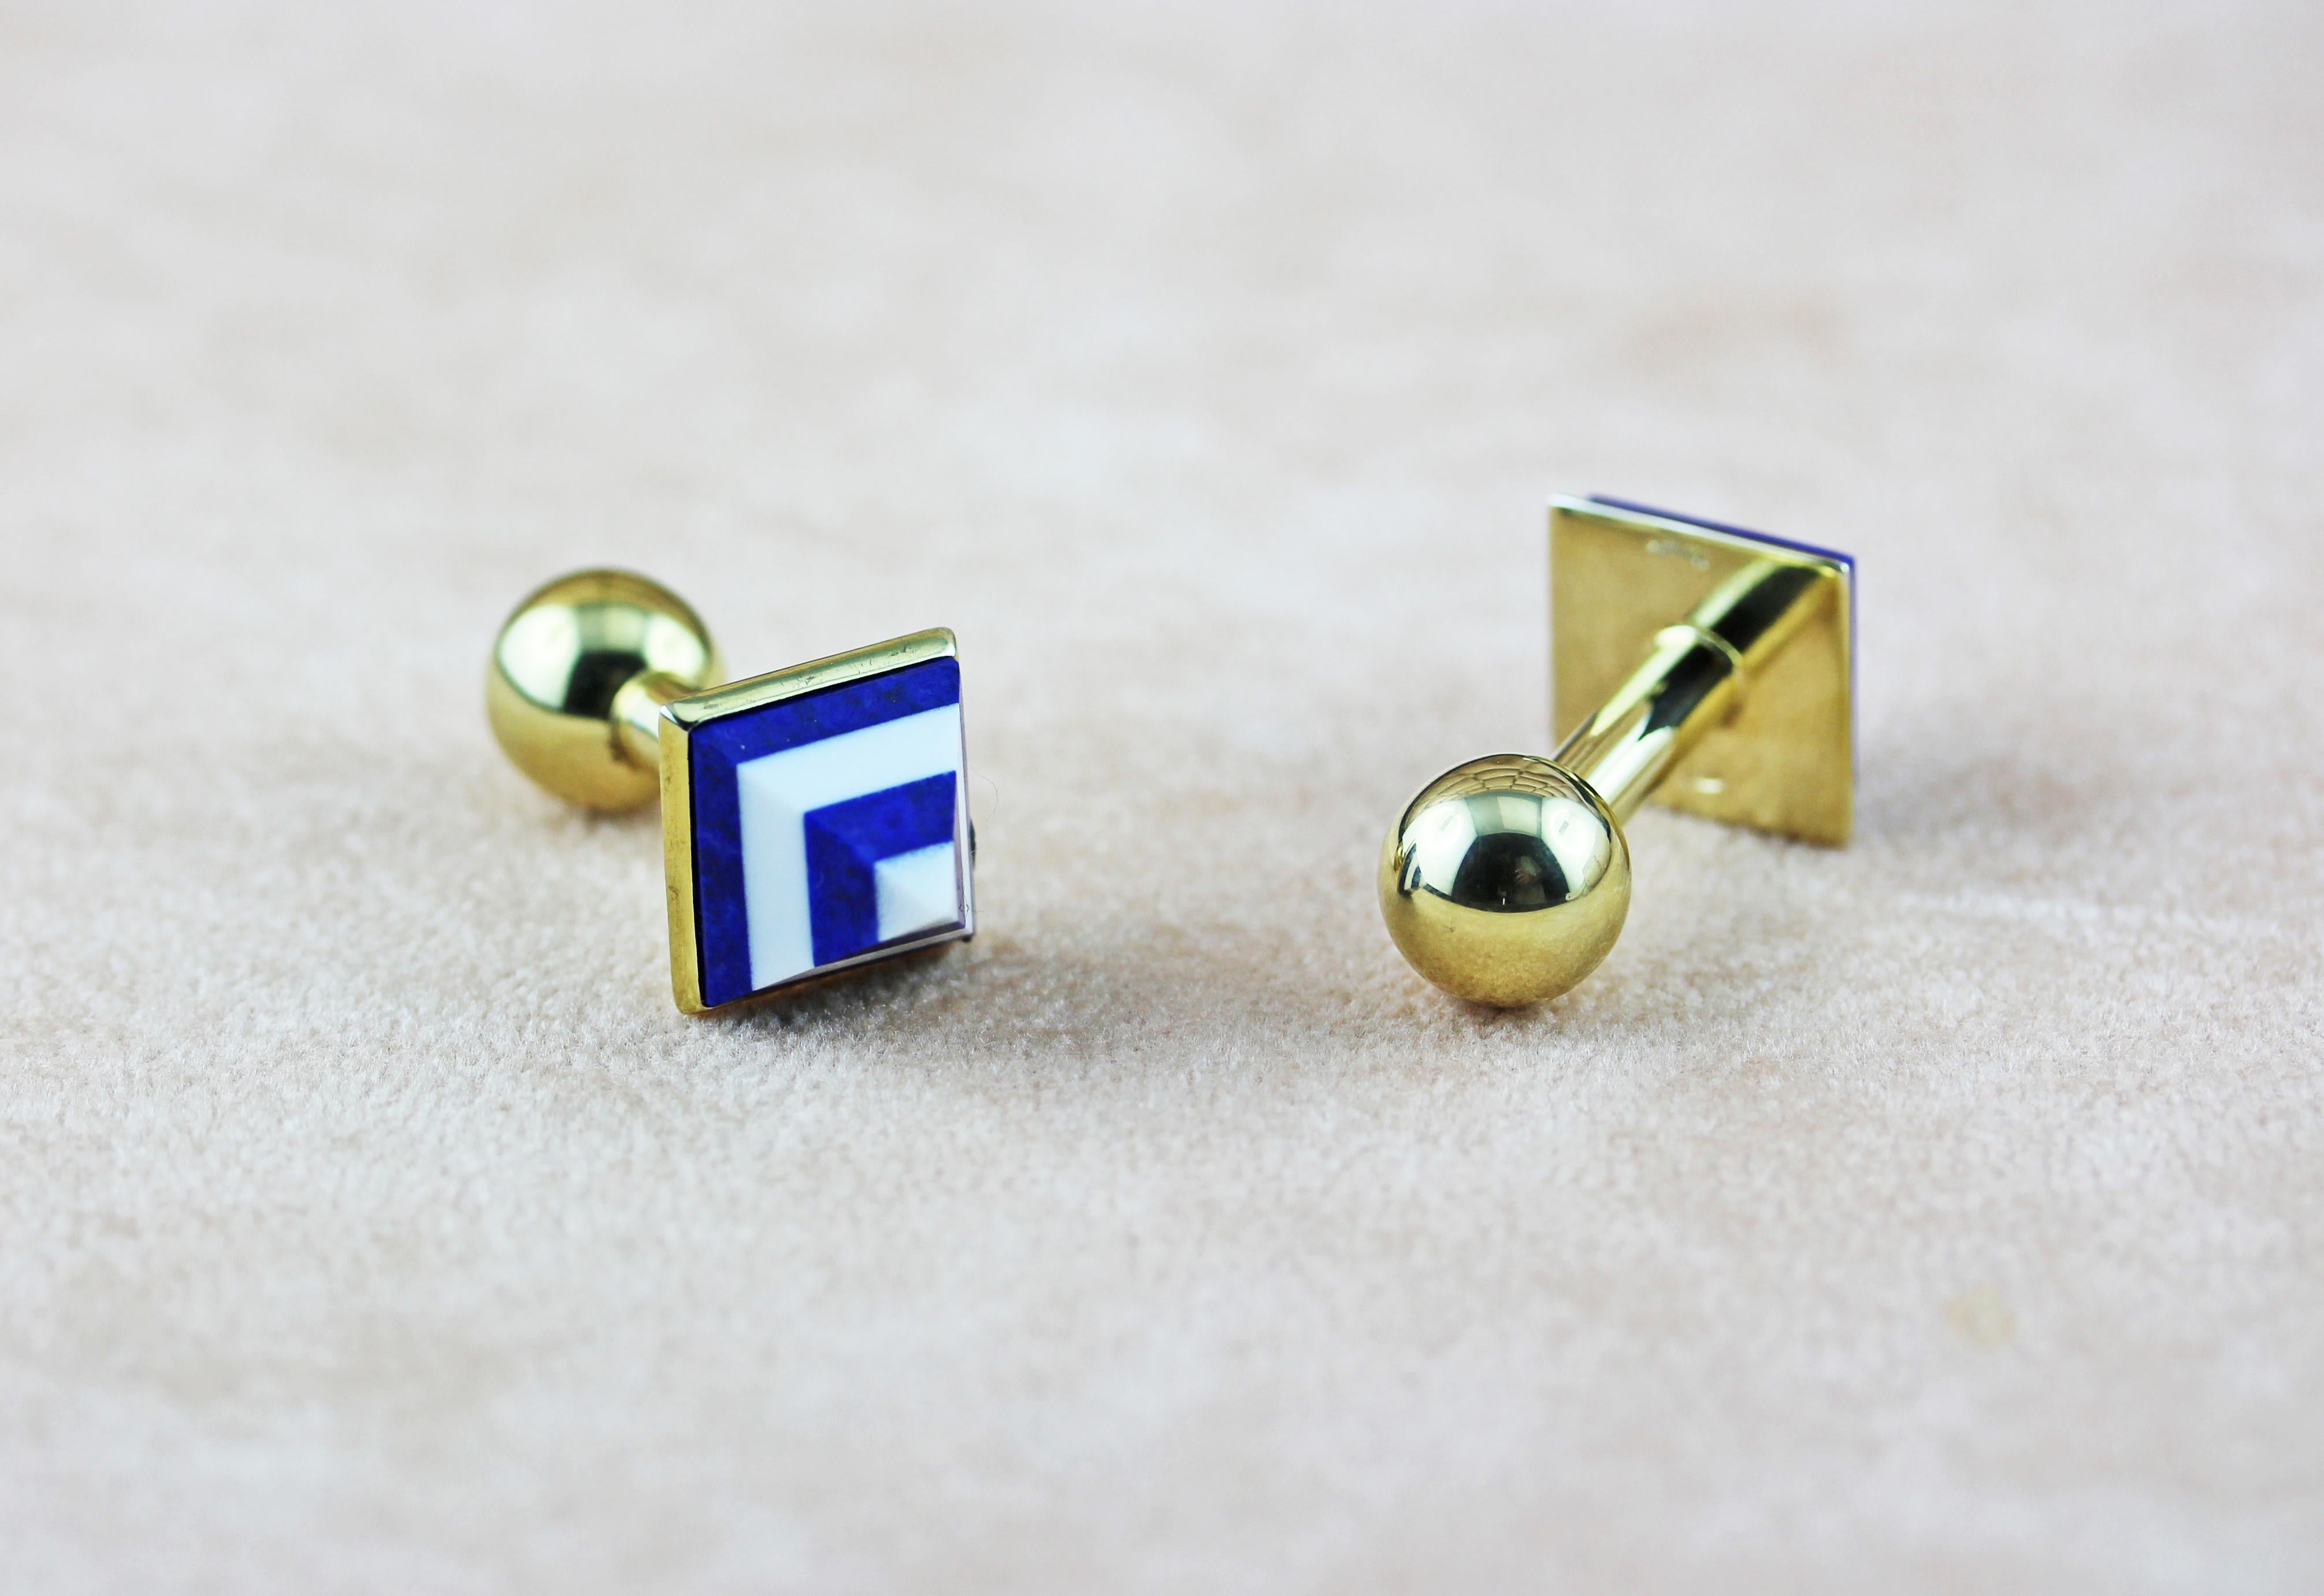 This superb pair of cufflinks feature a spherical toggle and minimalist post in sterling silver 925 and 18 karat yellow gold plated , while the front face is in the shape of a pyramid mounted featuring layers of white agate and lapis lazuli